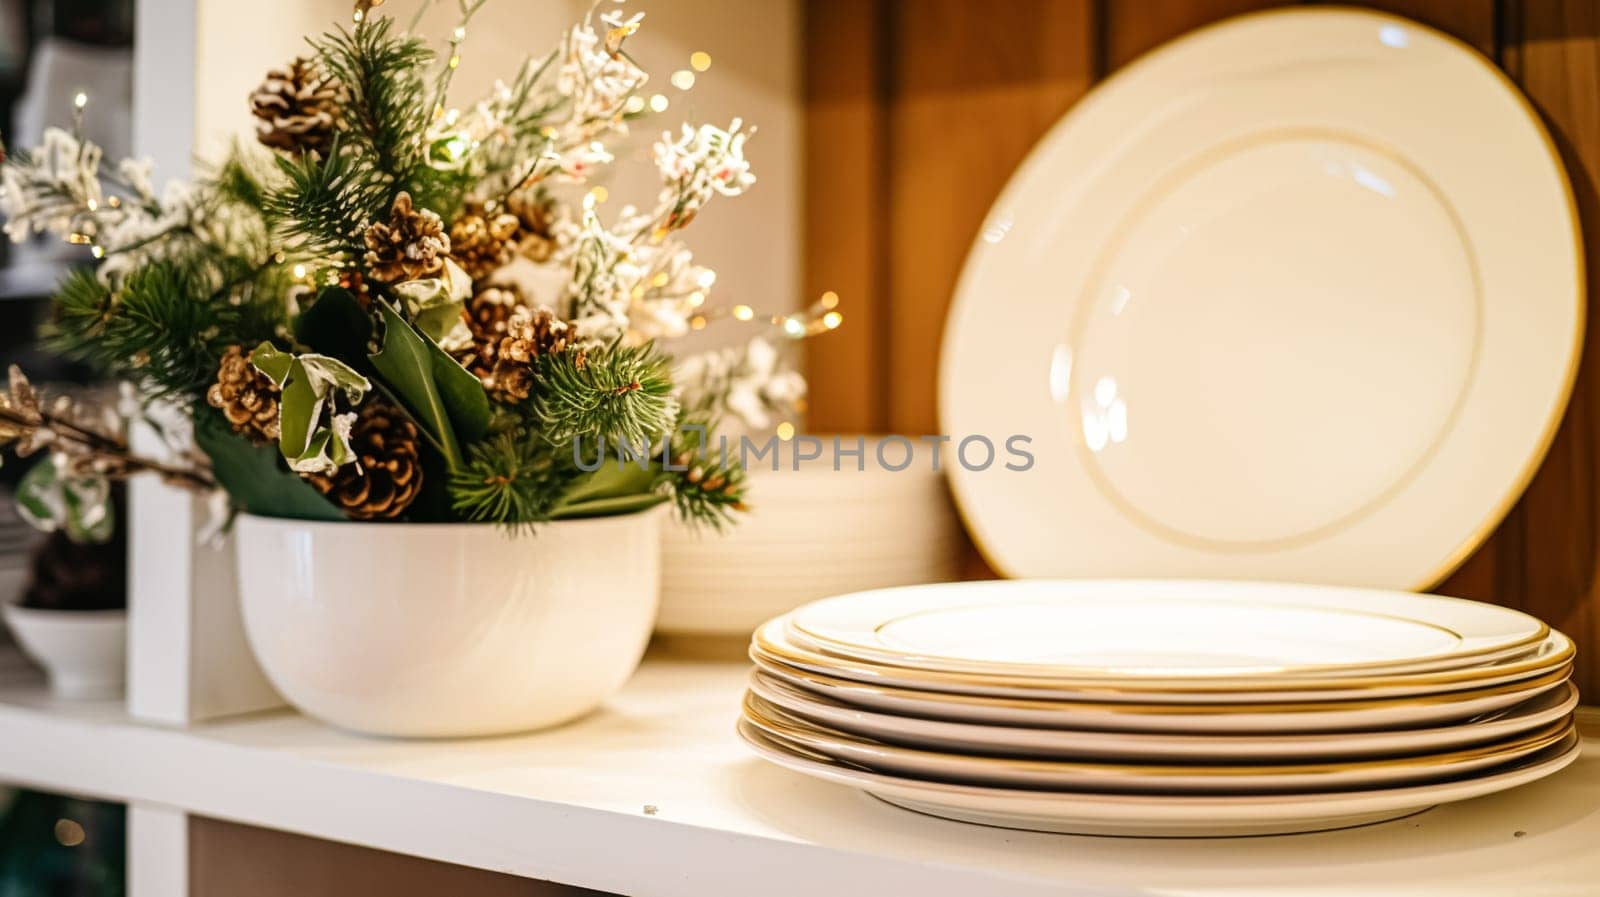 Dishware and crockery set for winter holiday family dinner, Christmas homeware decor for holidays in the English country house, gift set and home styling by Anneleven